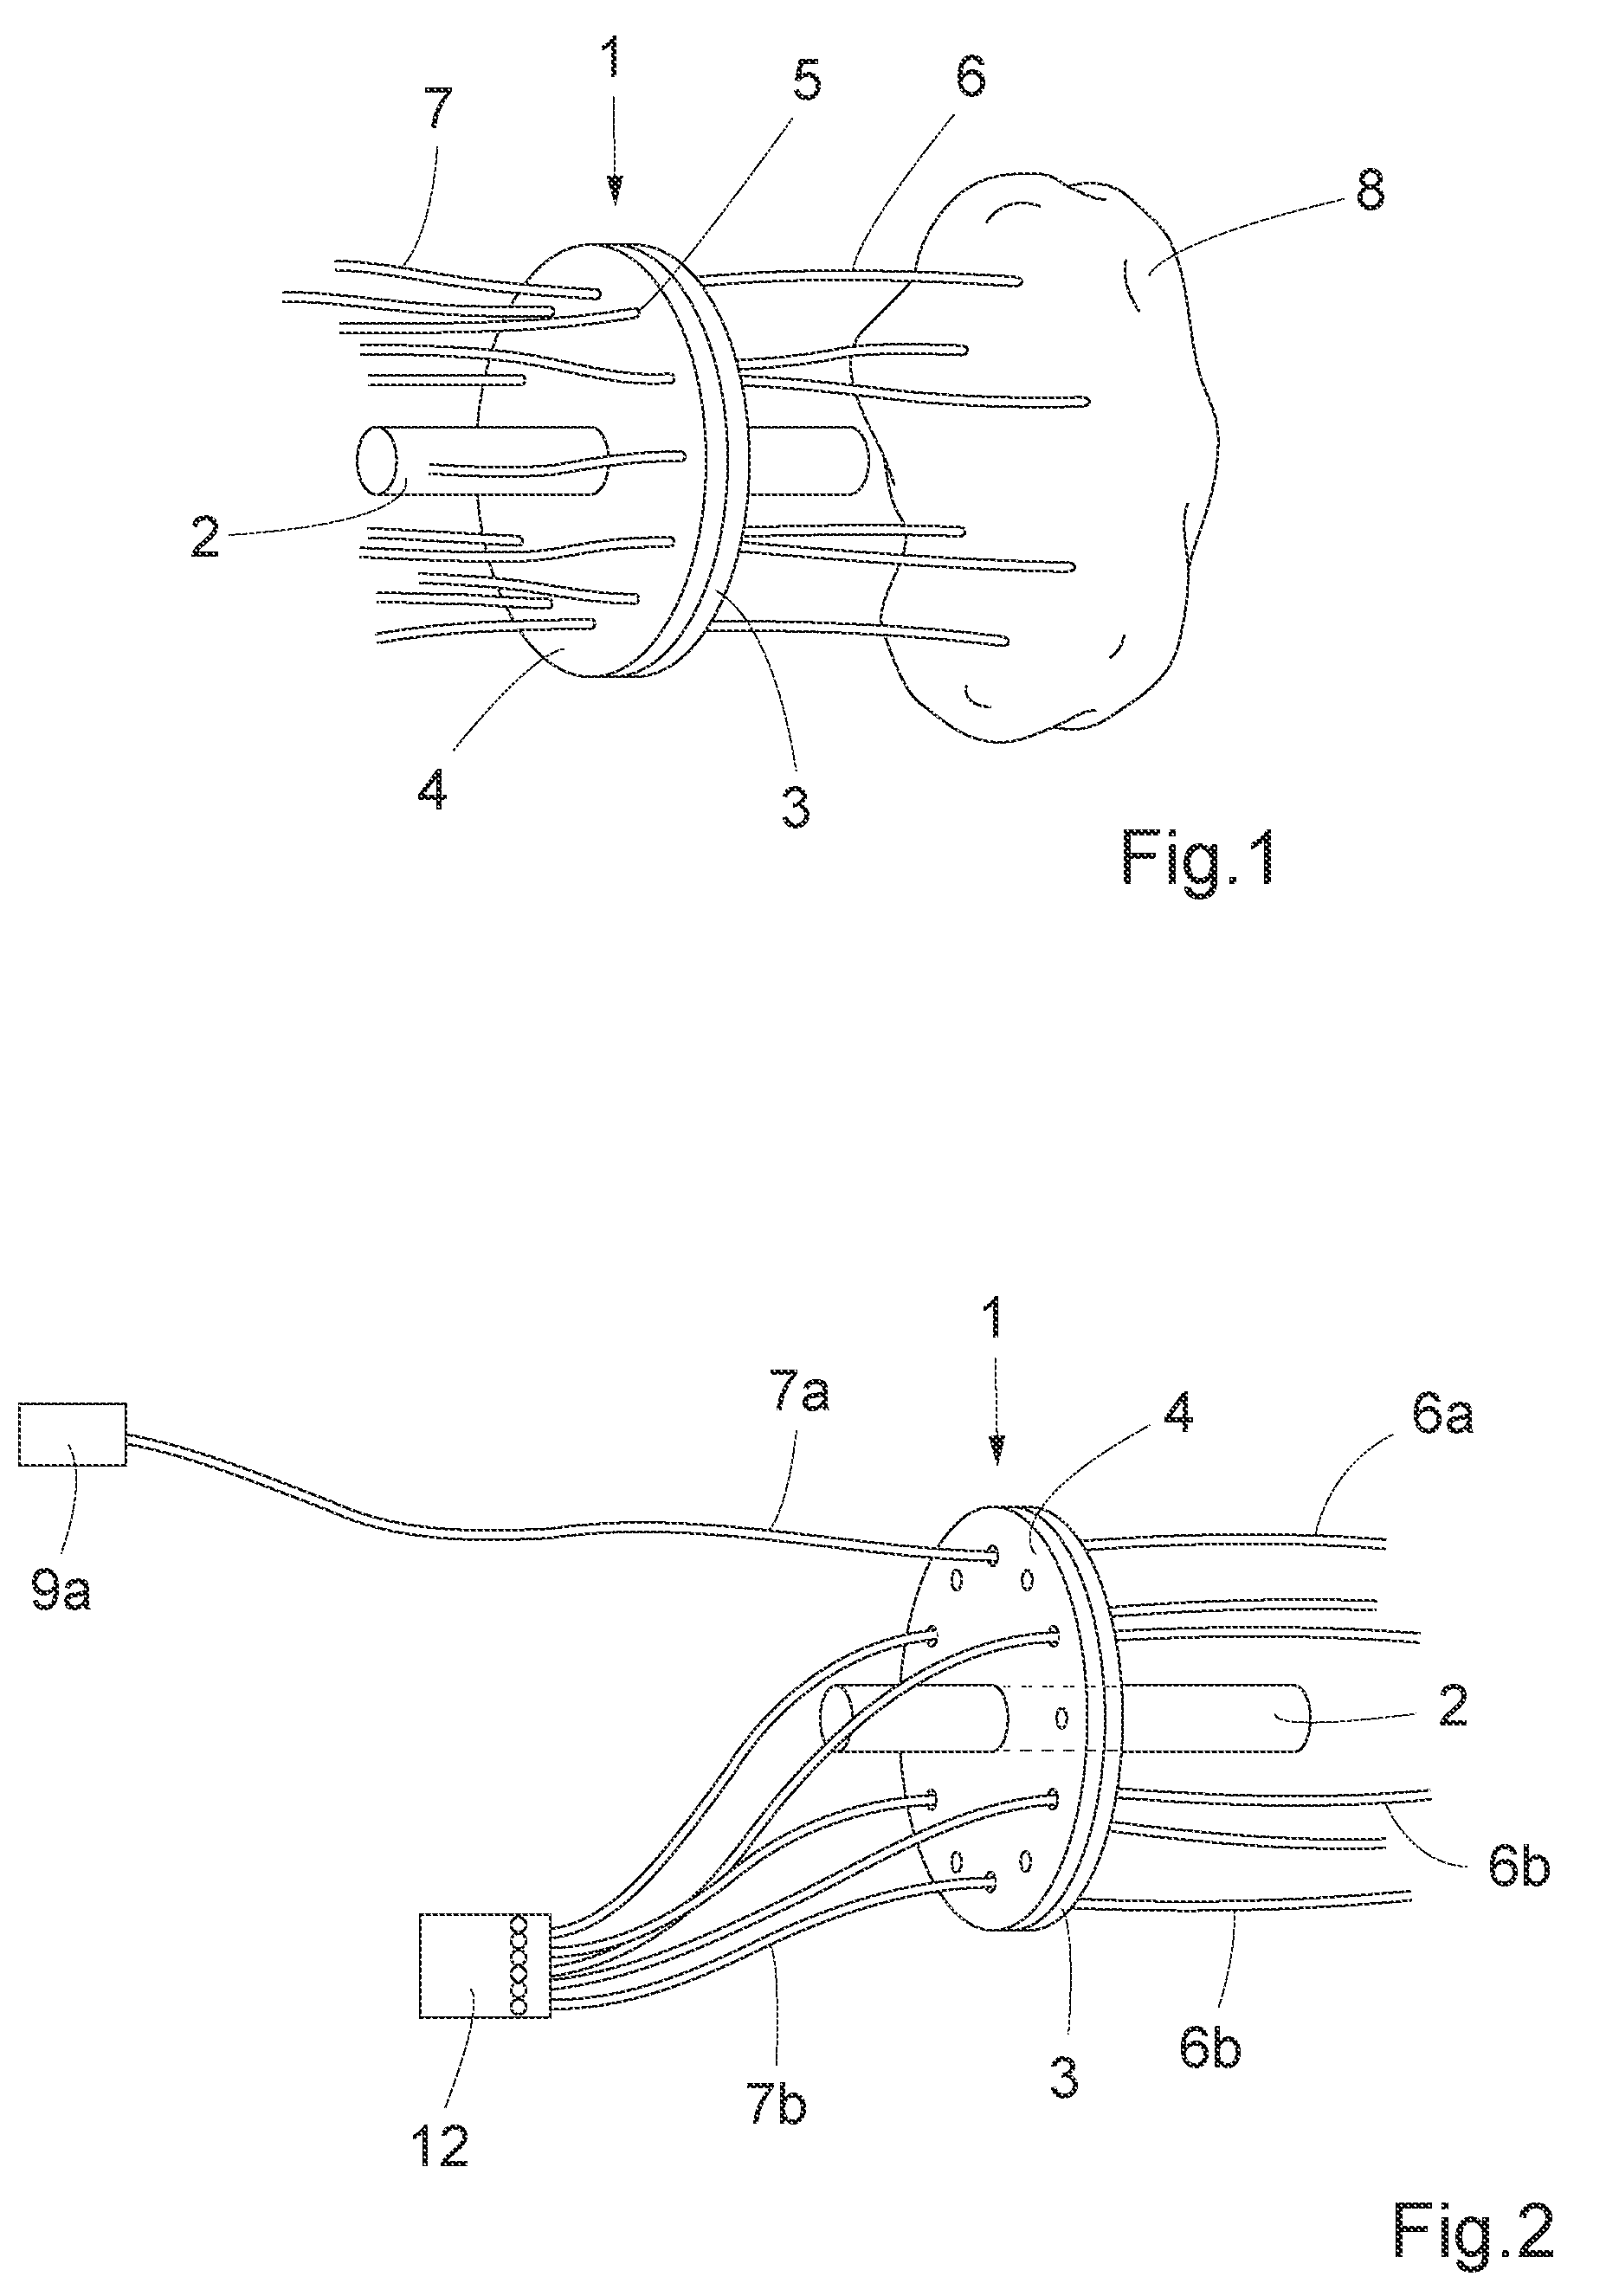 Light Coupling Adapter Device For Photodynamic Or Photothermal Therapy Or Photodynamic Diagnosis, Corresponding System And Method